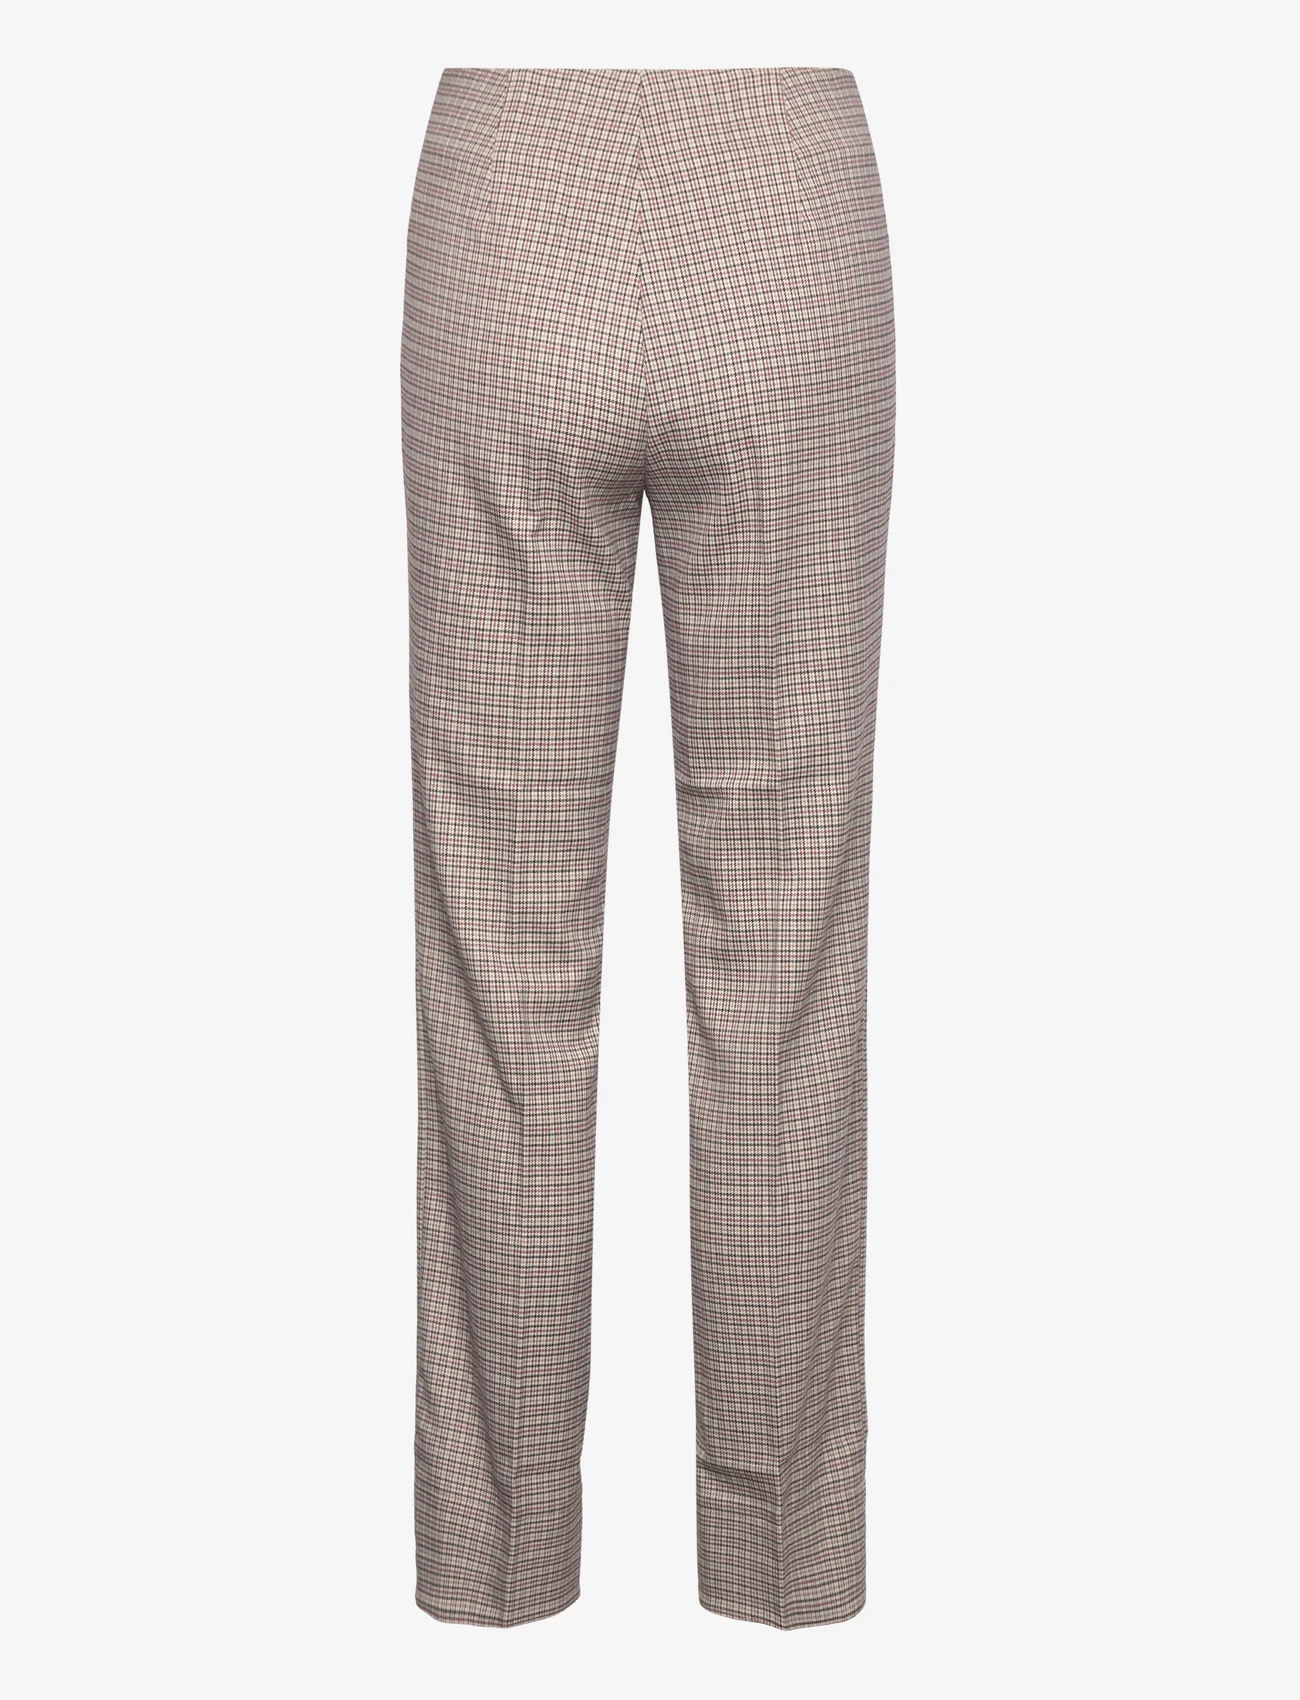 Notes du Nord - Emia Pants - slim fit hosen - checked - 1